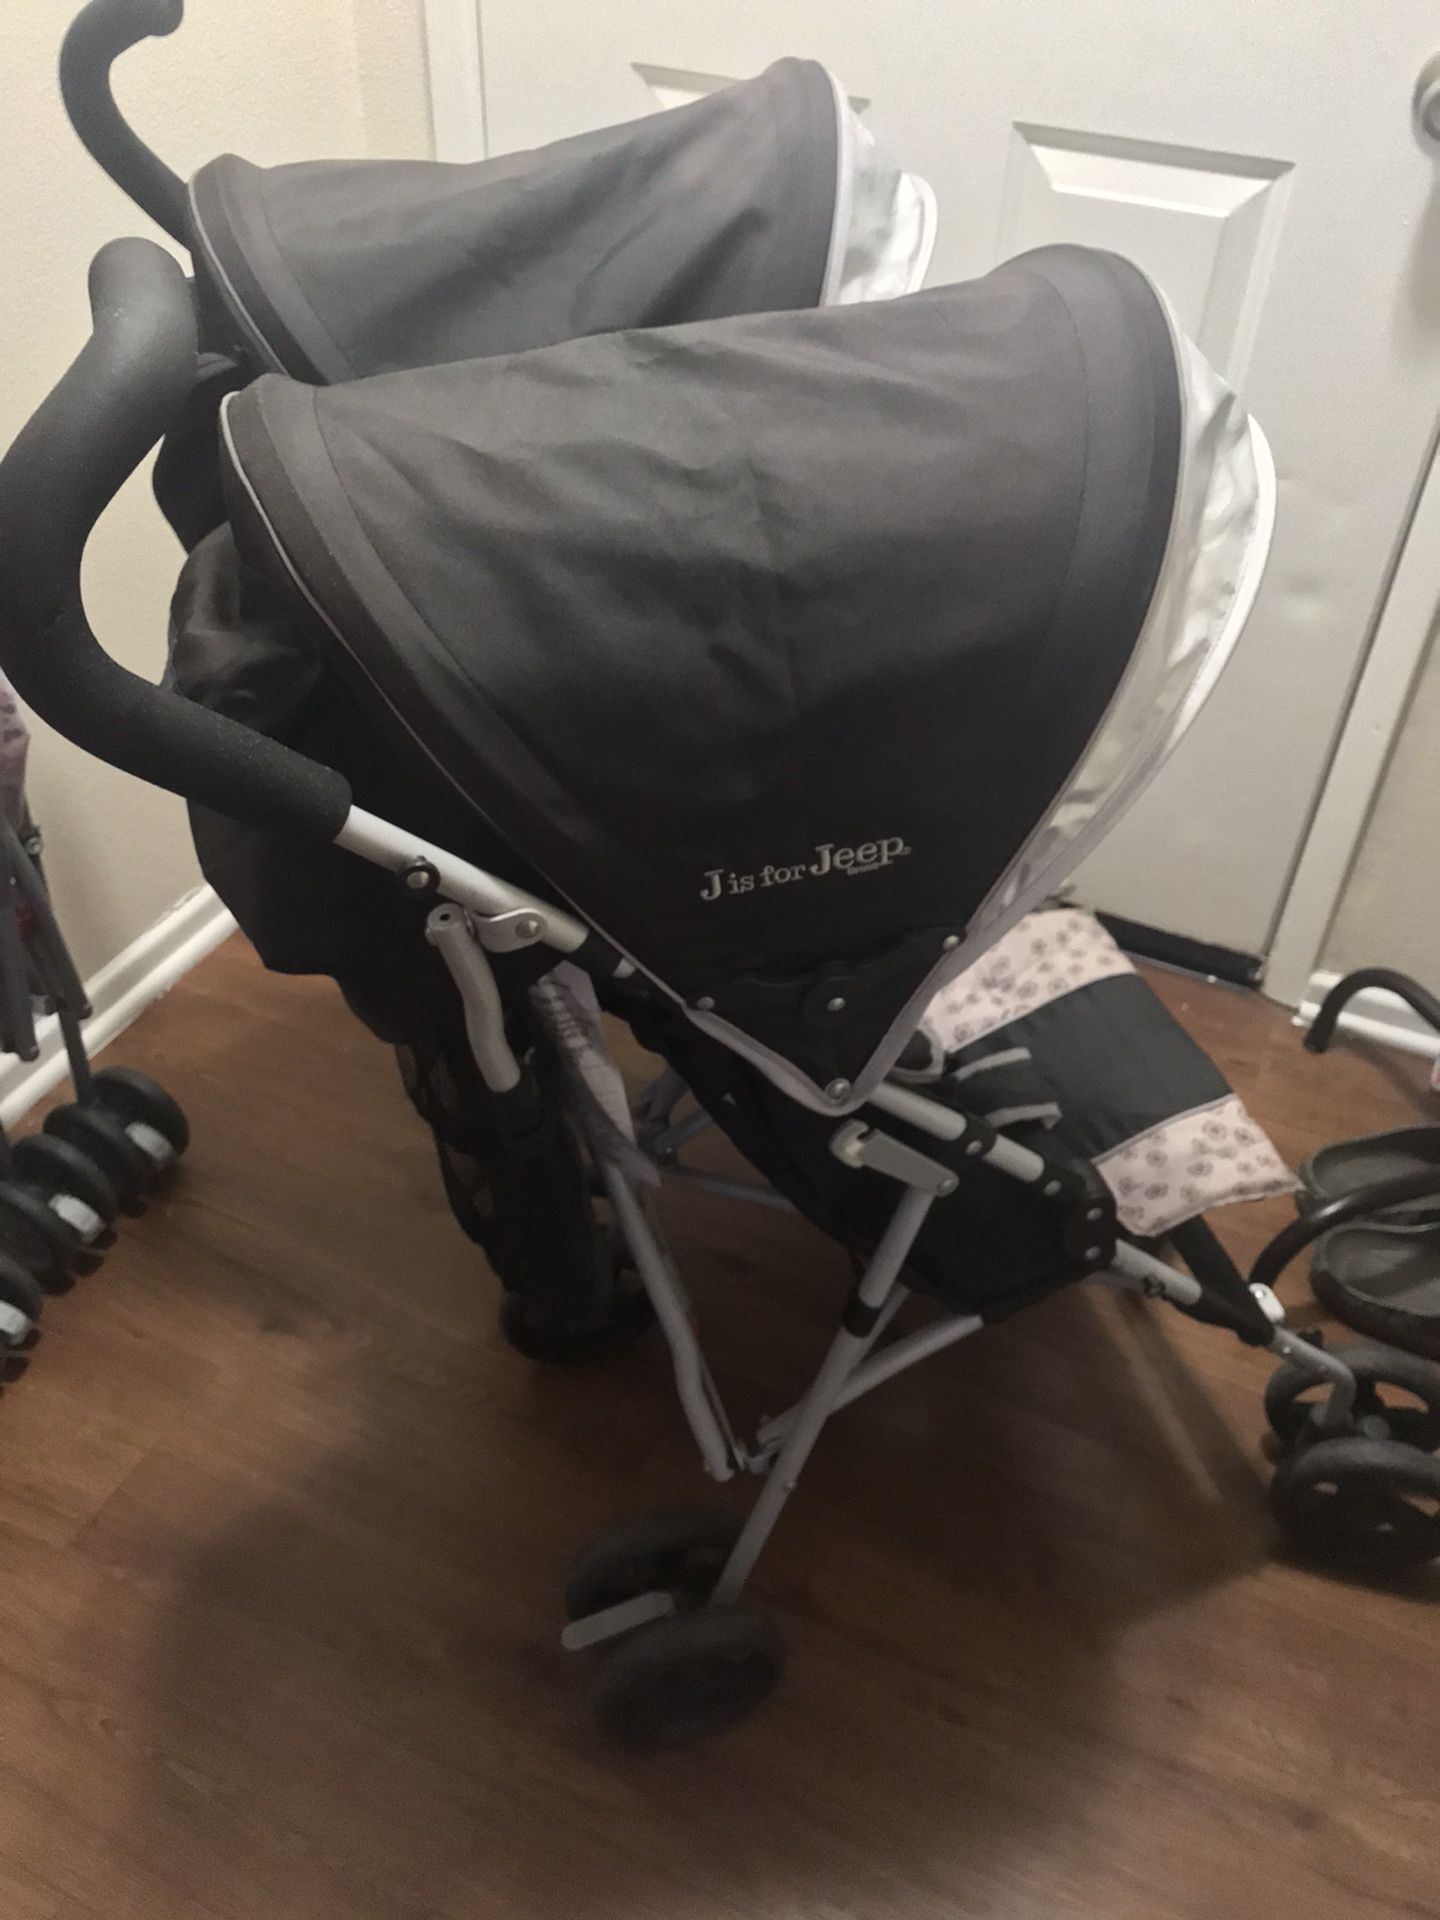 Jeep Scout Double Stroller (J for Jeep)